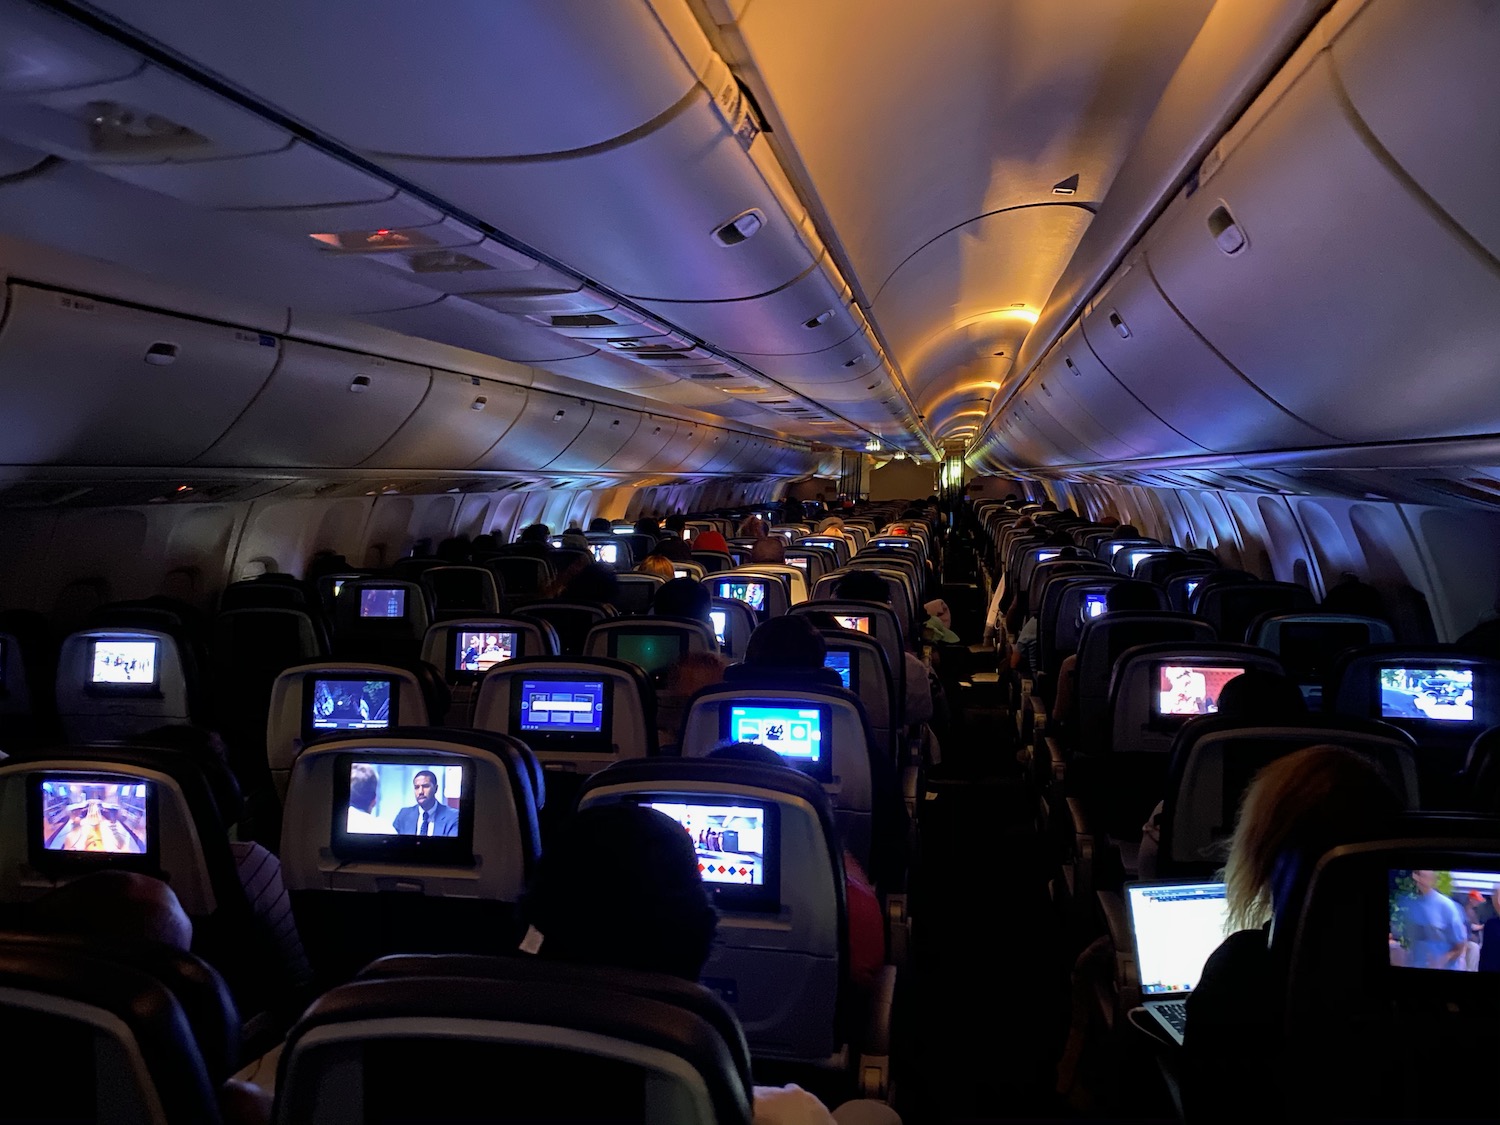 a group of people sitting in an airplane with monitors on the seats